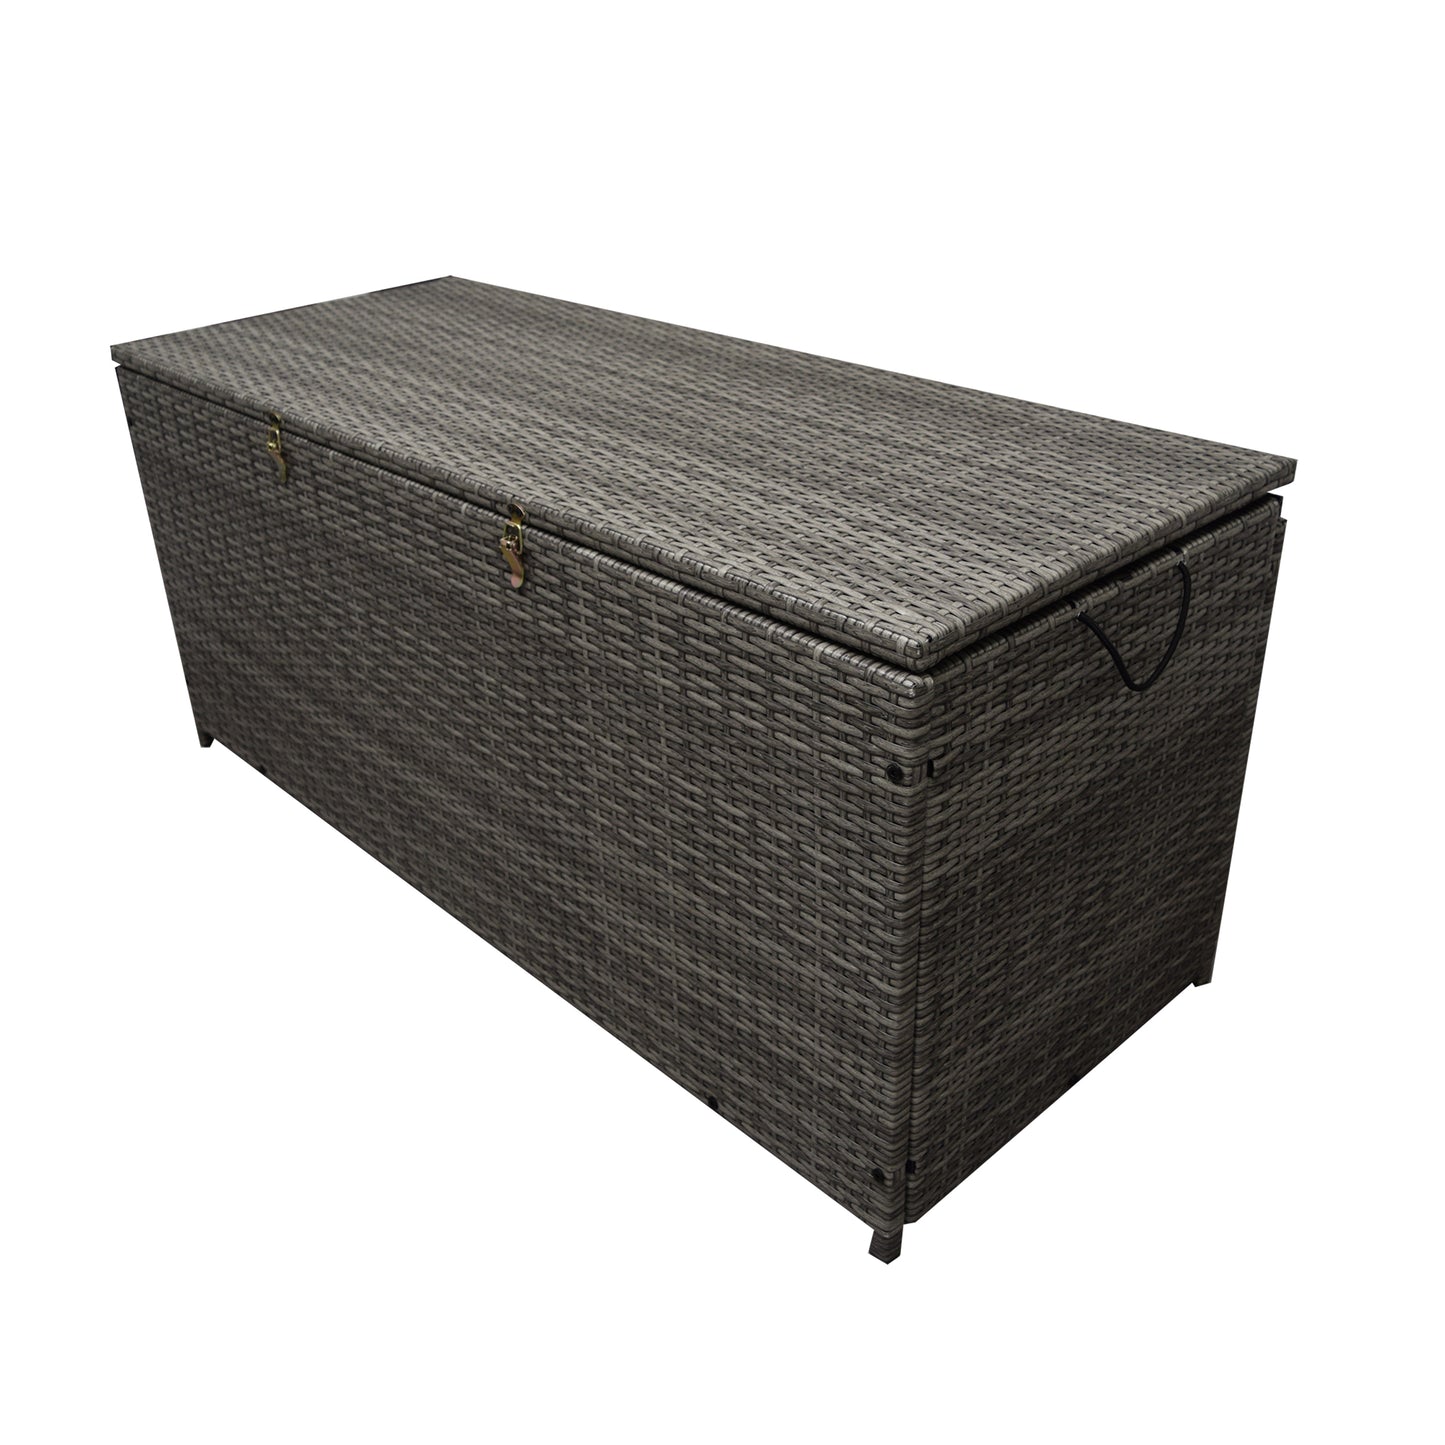 Grey Wicker Patio Deck Box with 113 Gallon Storage and Metal Frame